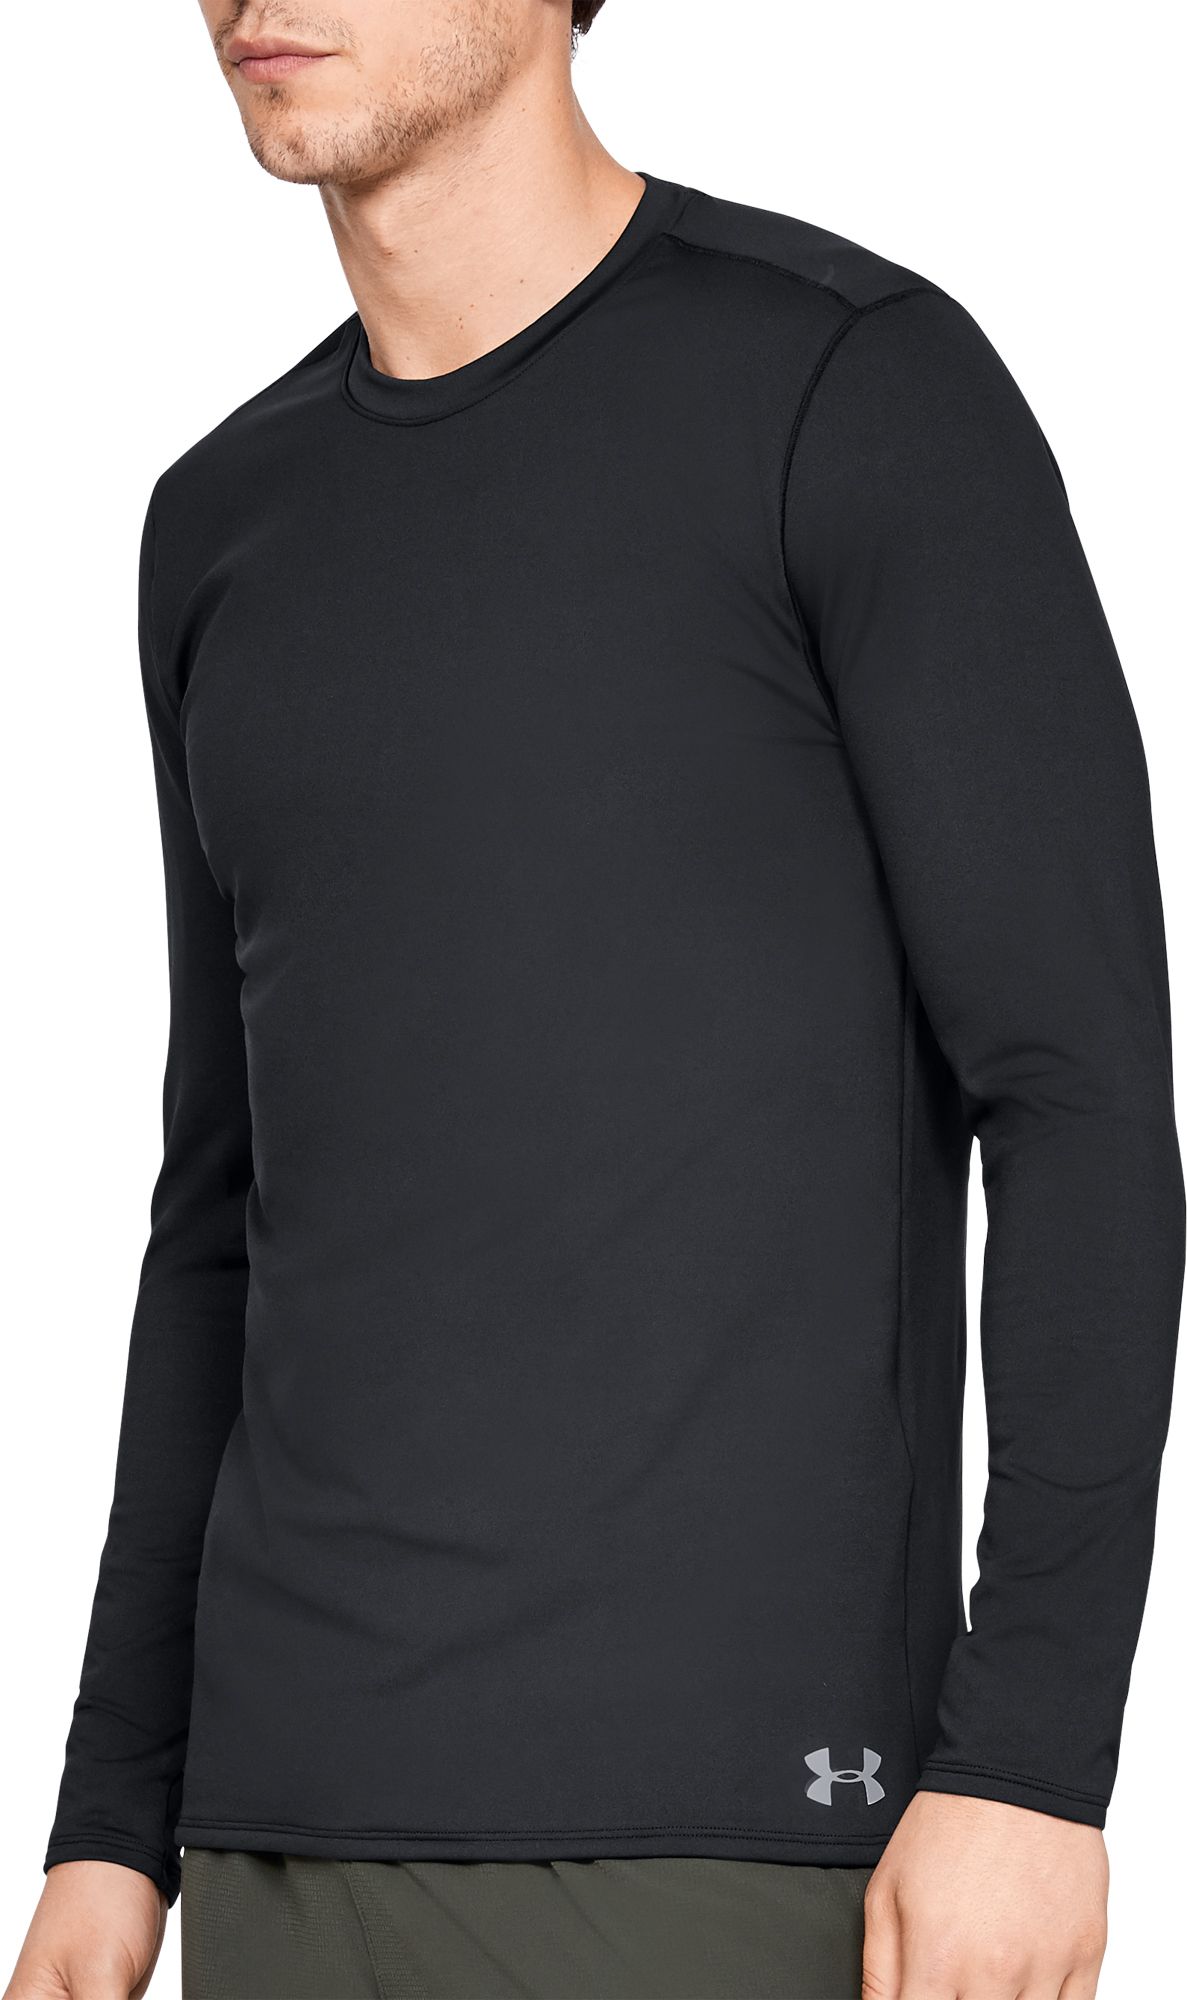 Under Armour Men's Coldgear Fitted Crew Shirt Shop, 51% OFF | www 